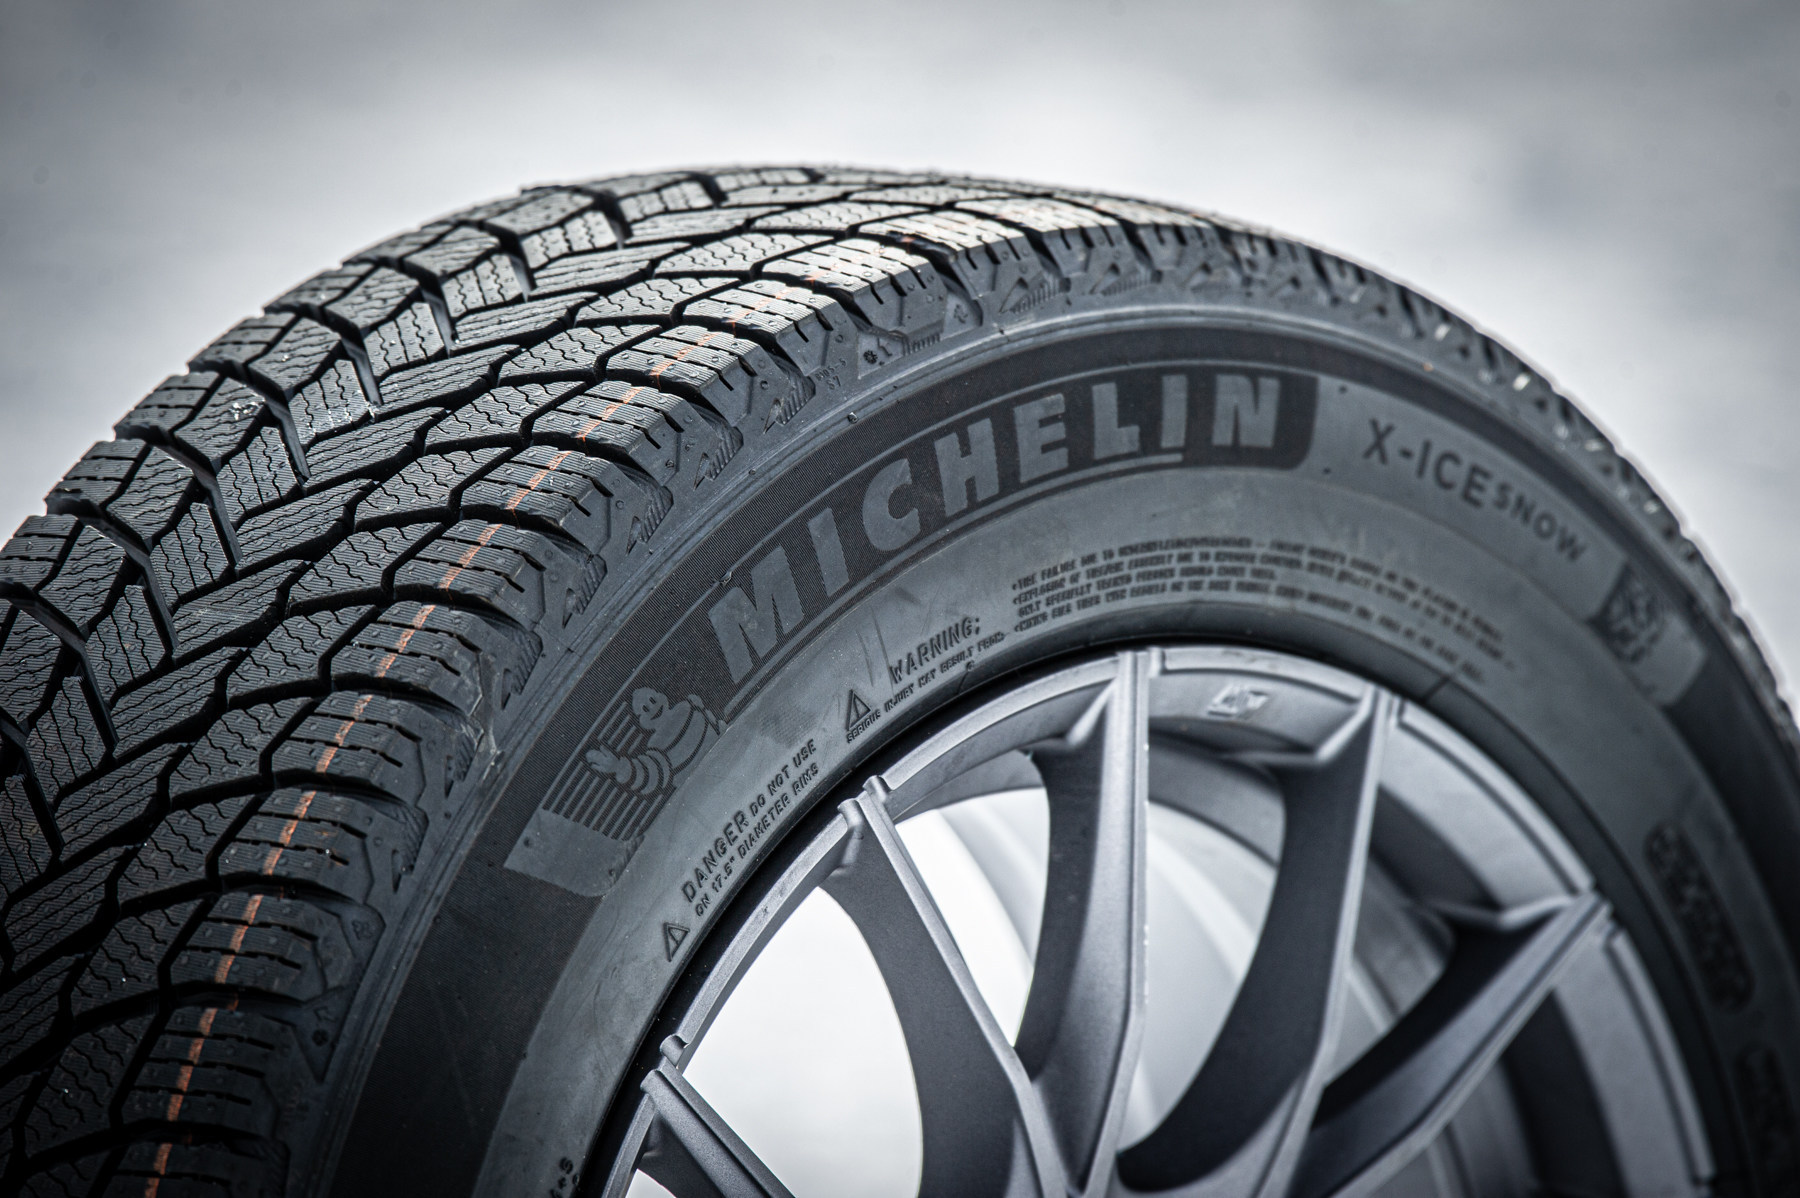 Michelin Introduces New X-ICE SNOW Winter Tire